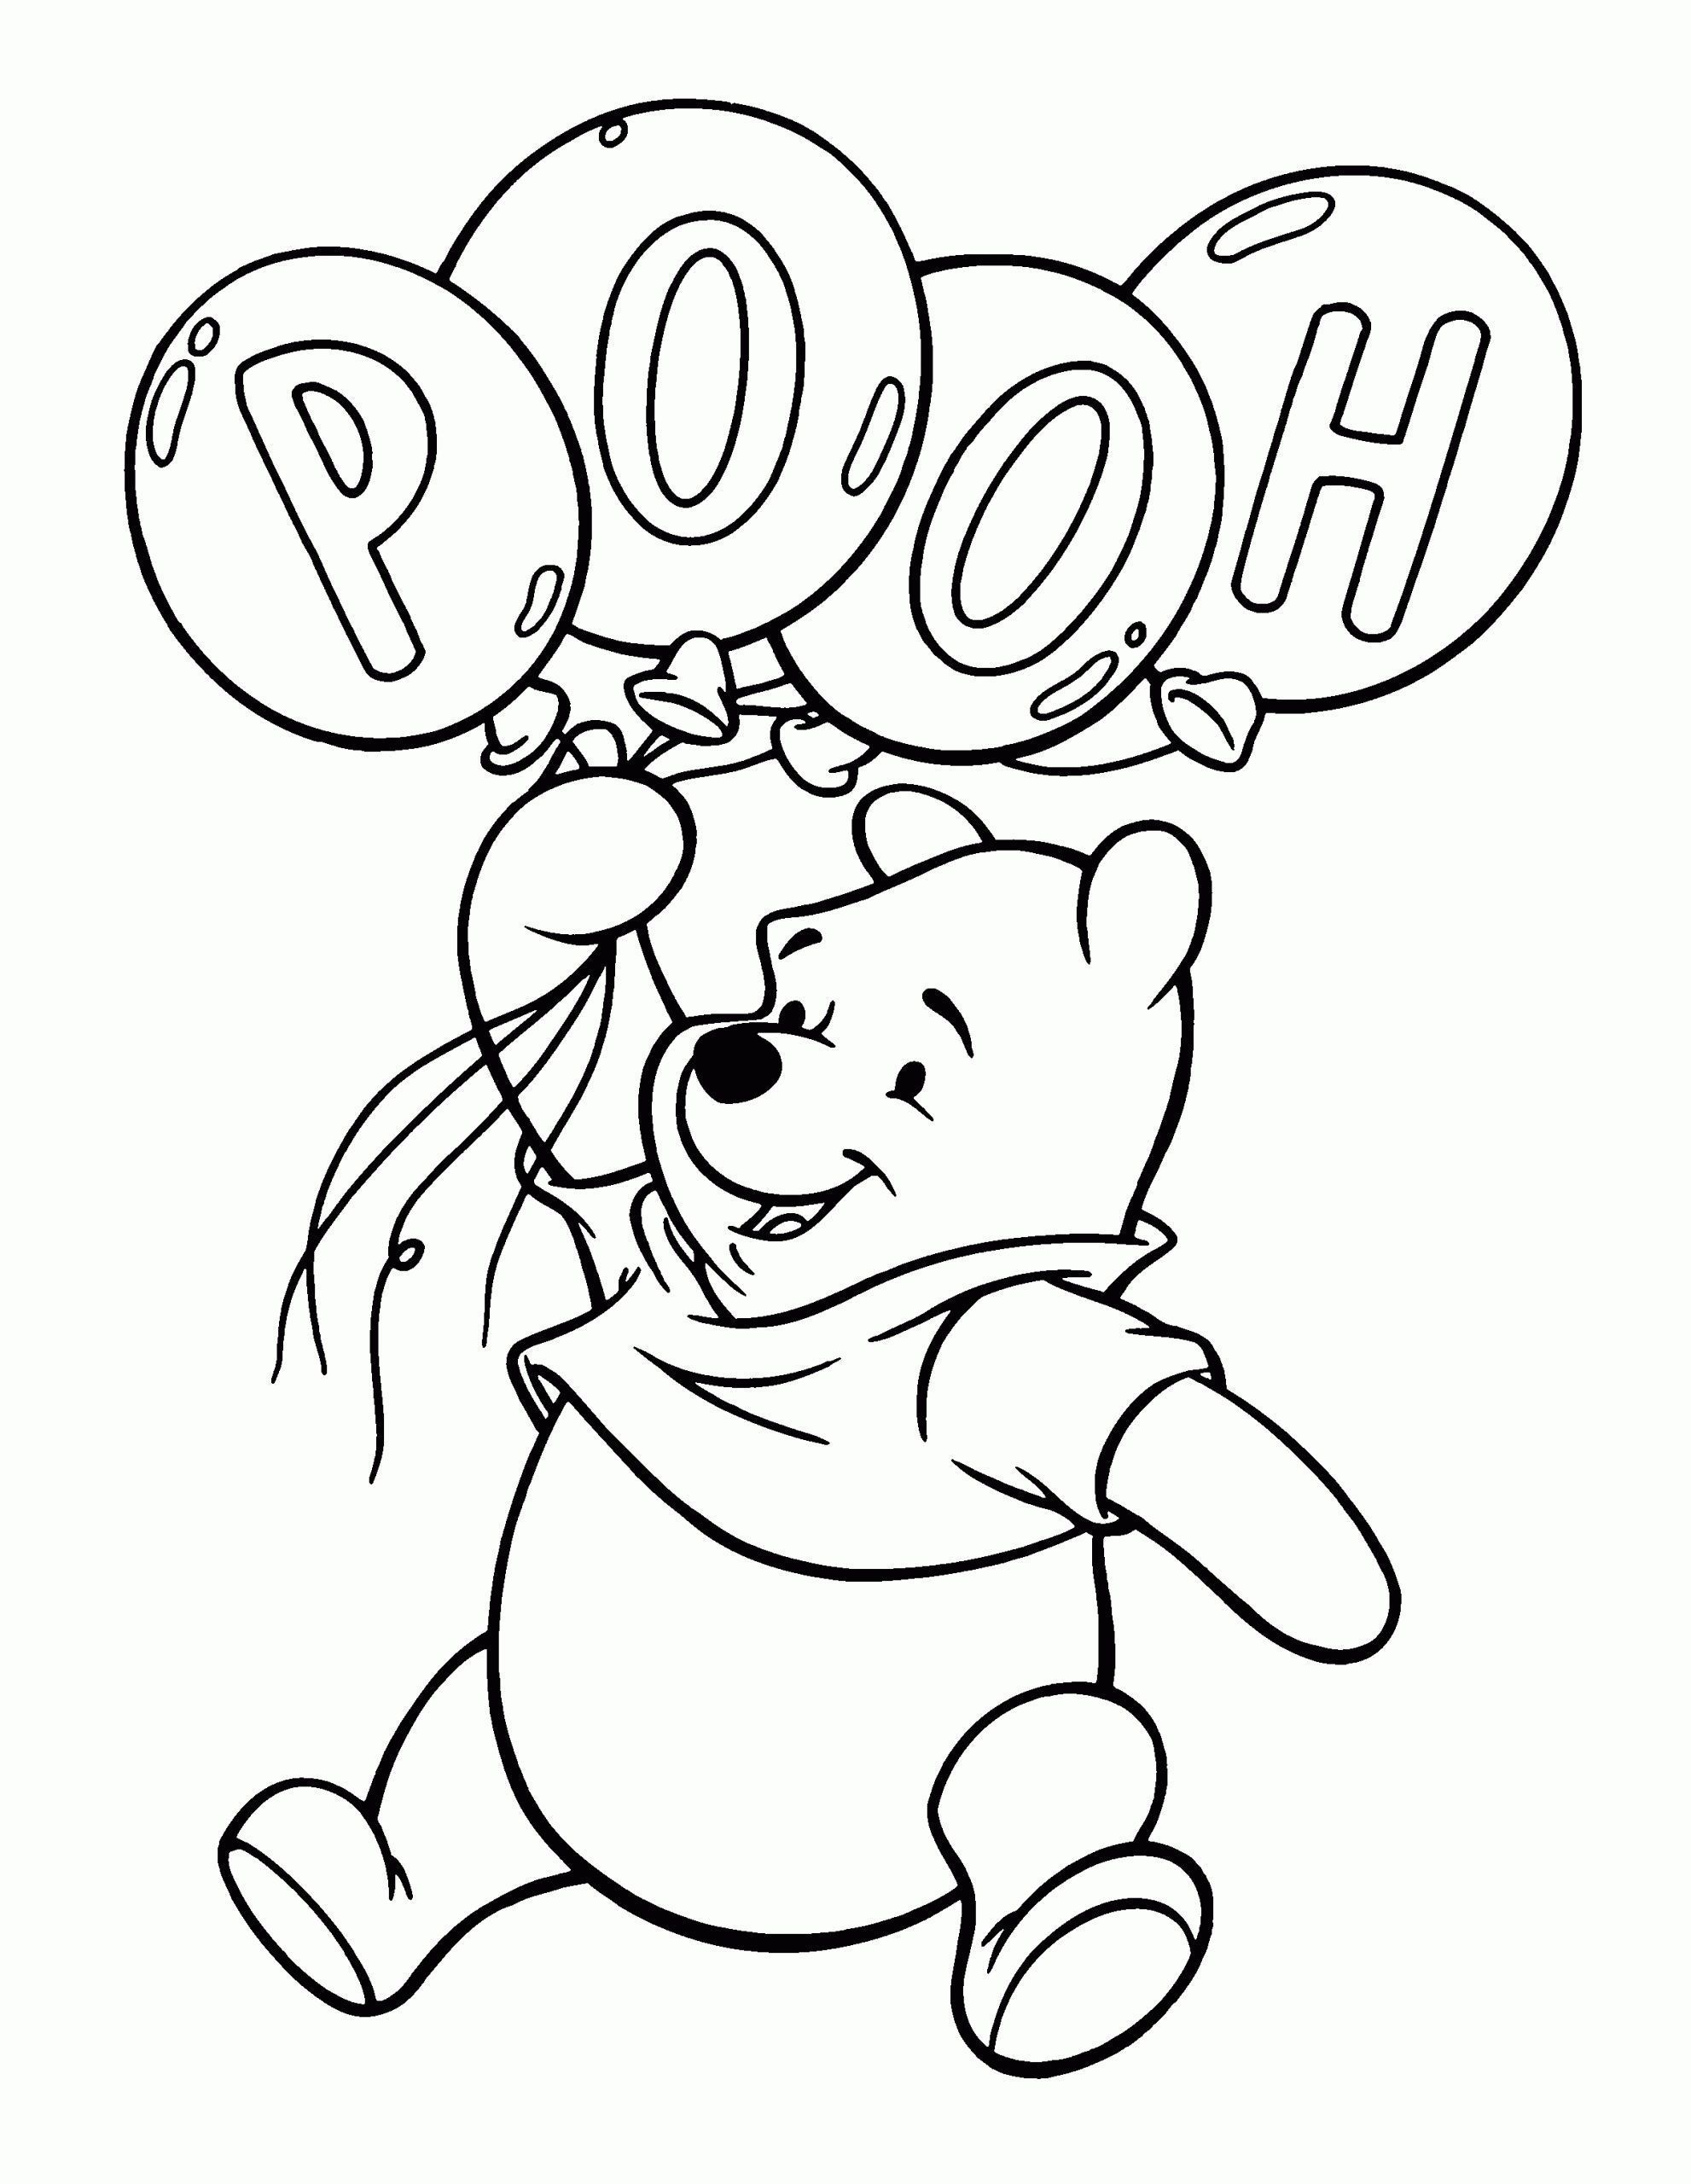 Baby Winnie the Pooh with Ballons Coloring Page